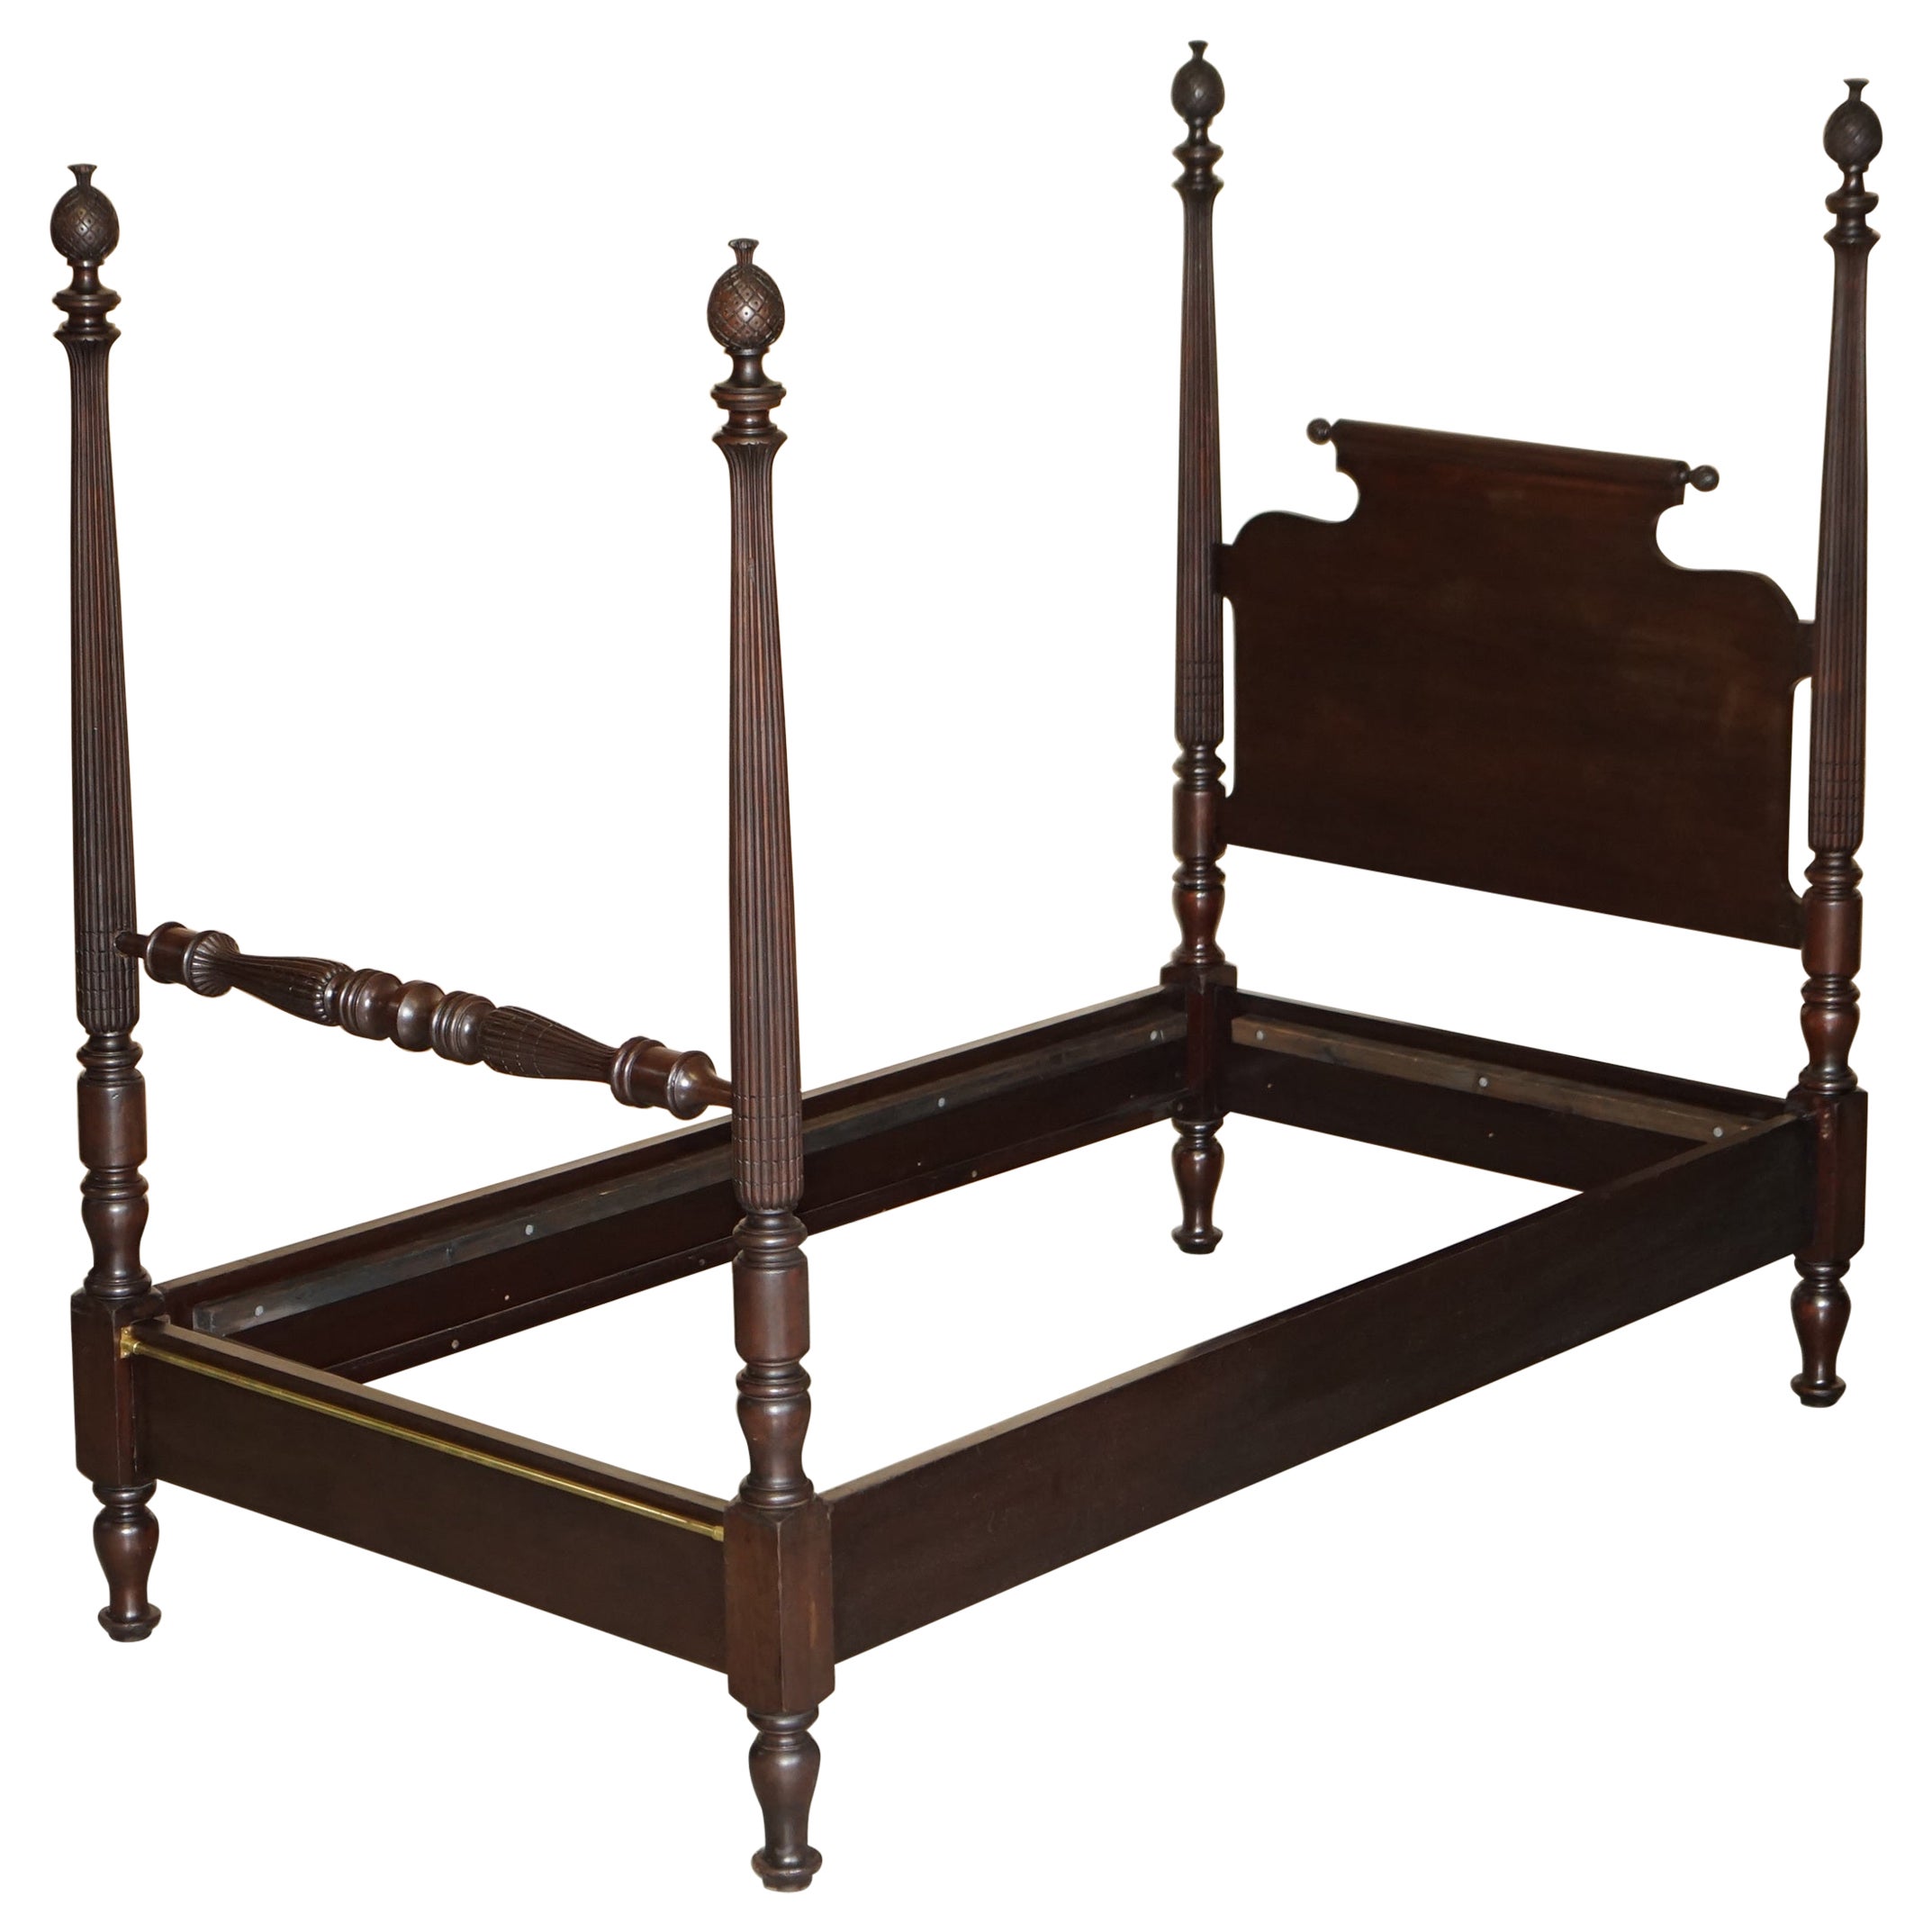 Circa 1800 American Federal Hardwood Four Poster Bed Frame with Carved Pillars